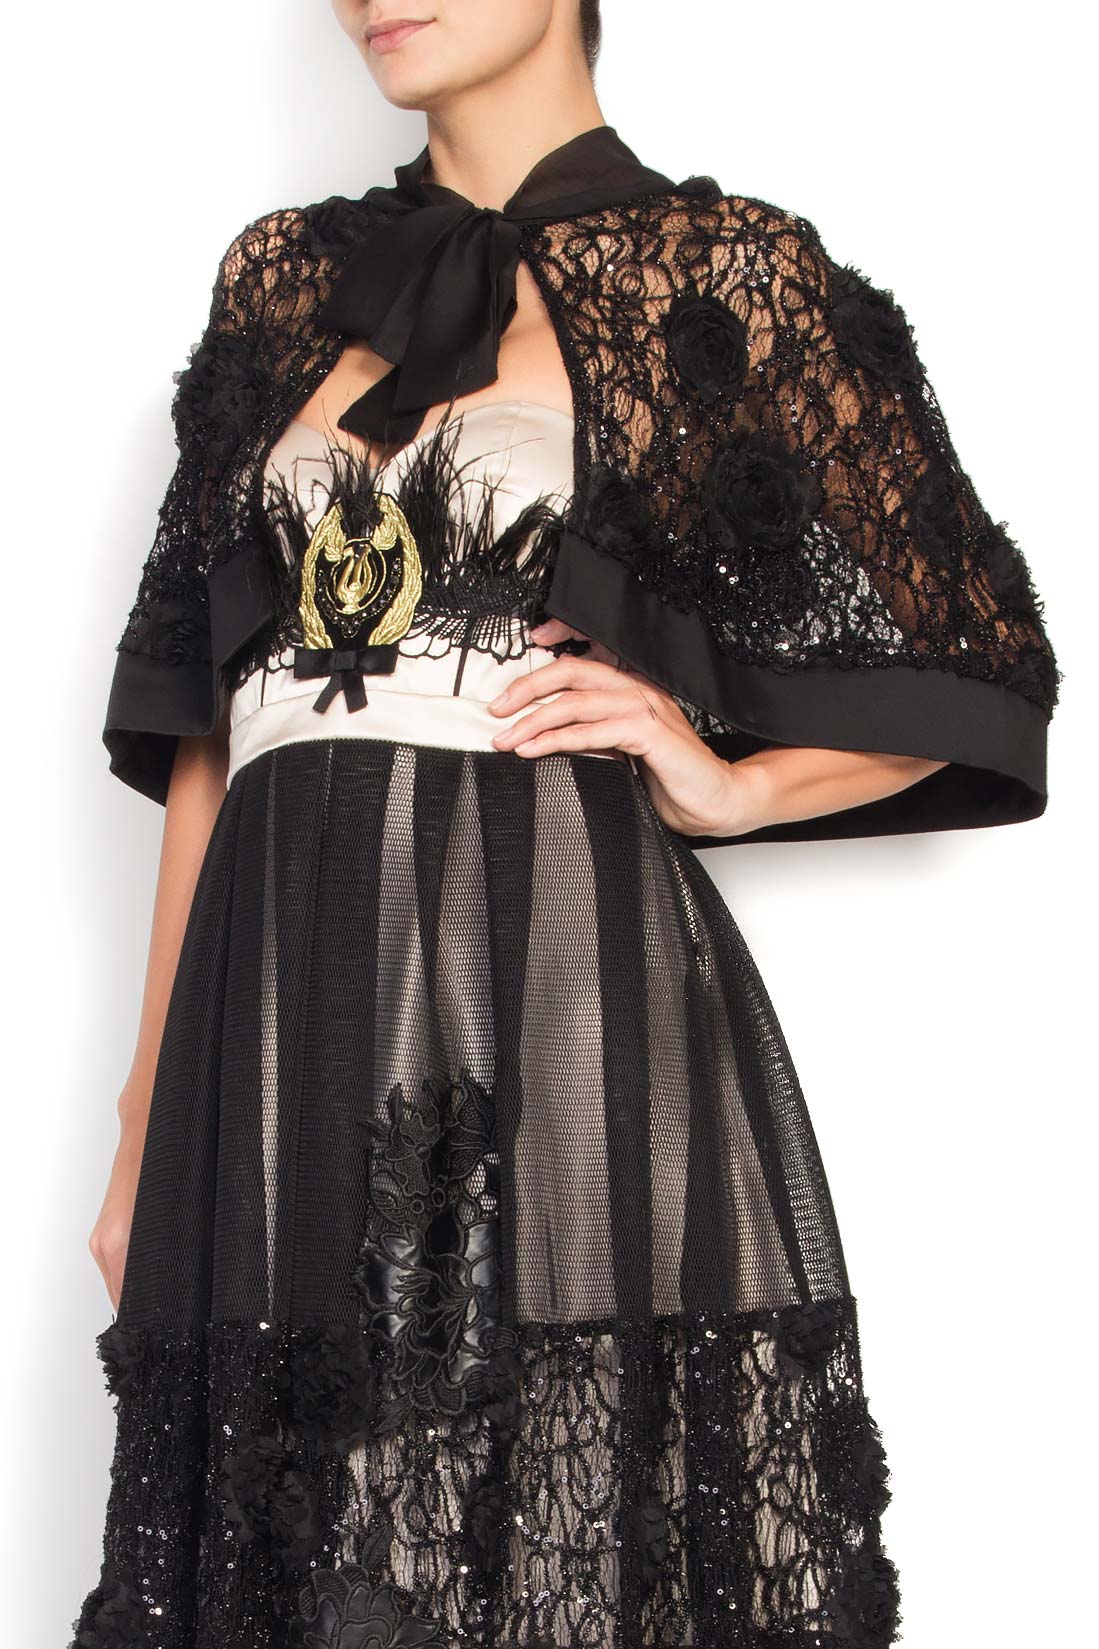 Lace cape with floral applications Elena Perseil image 1